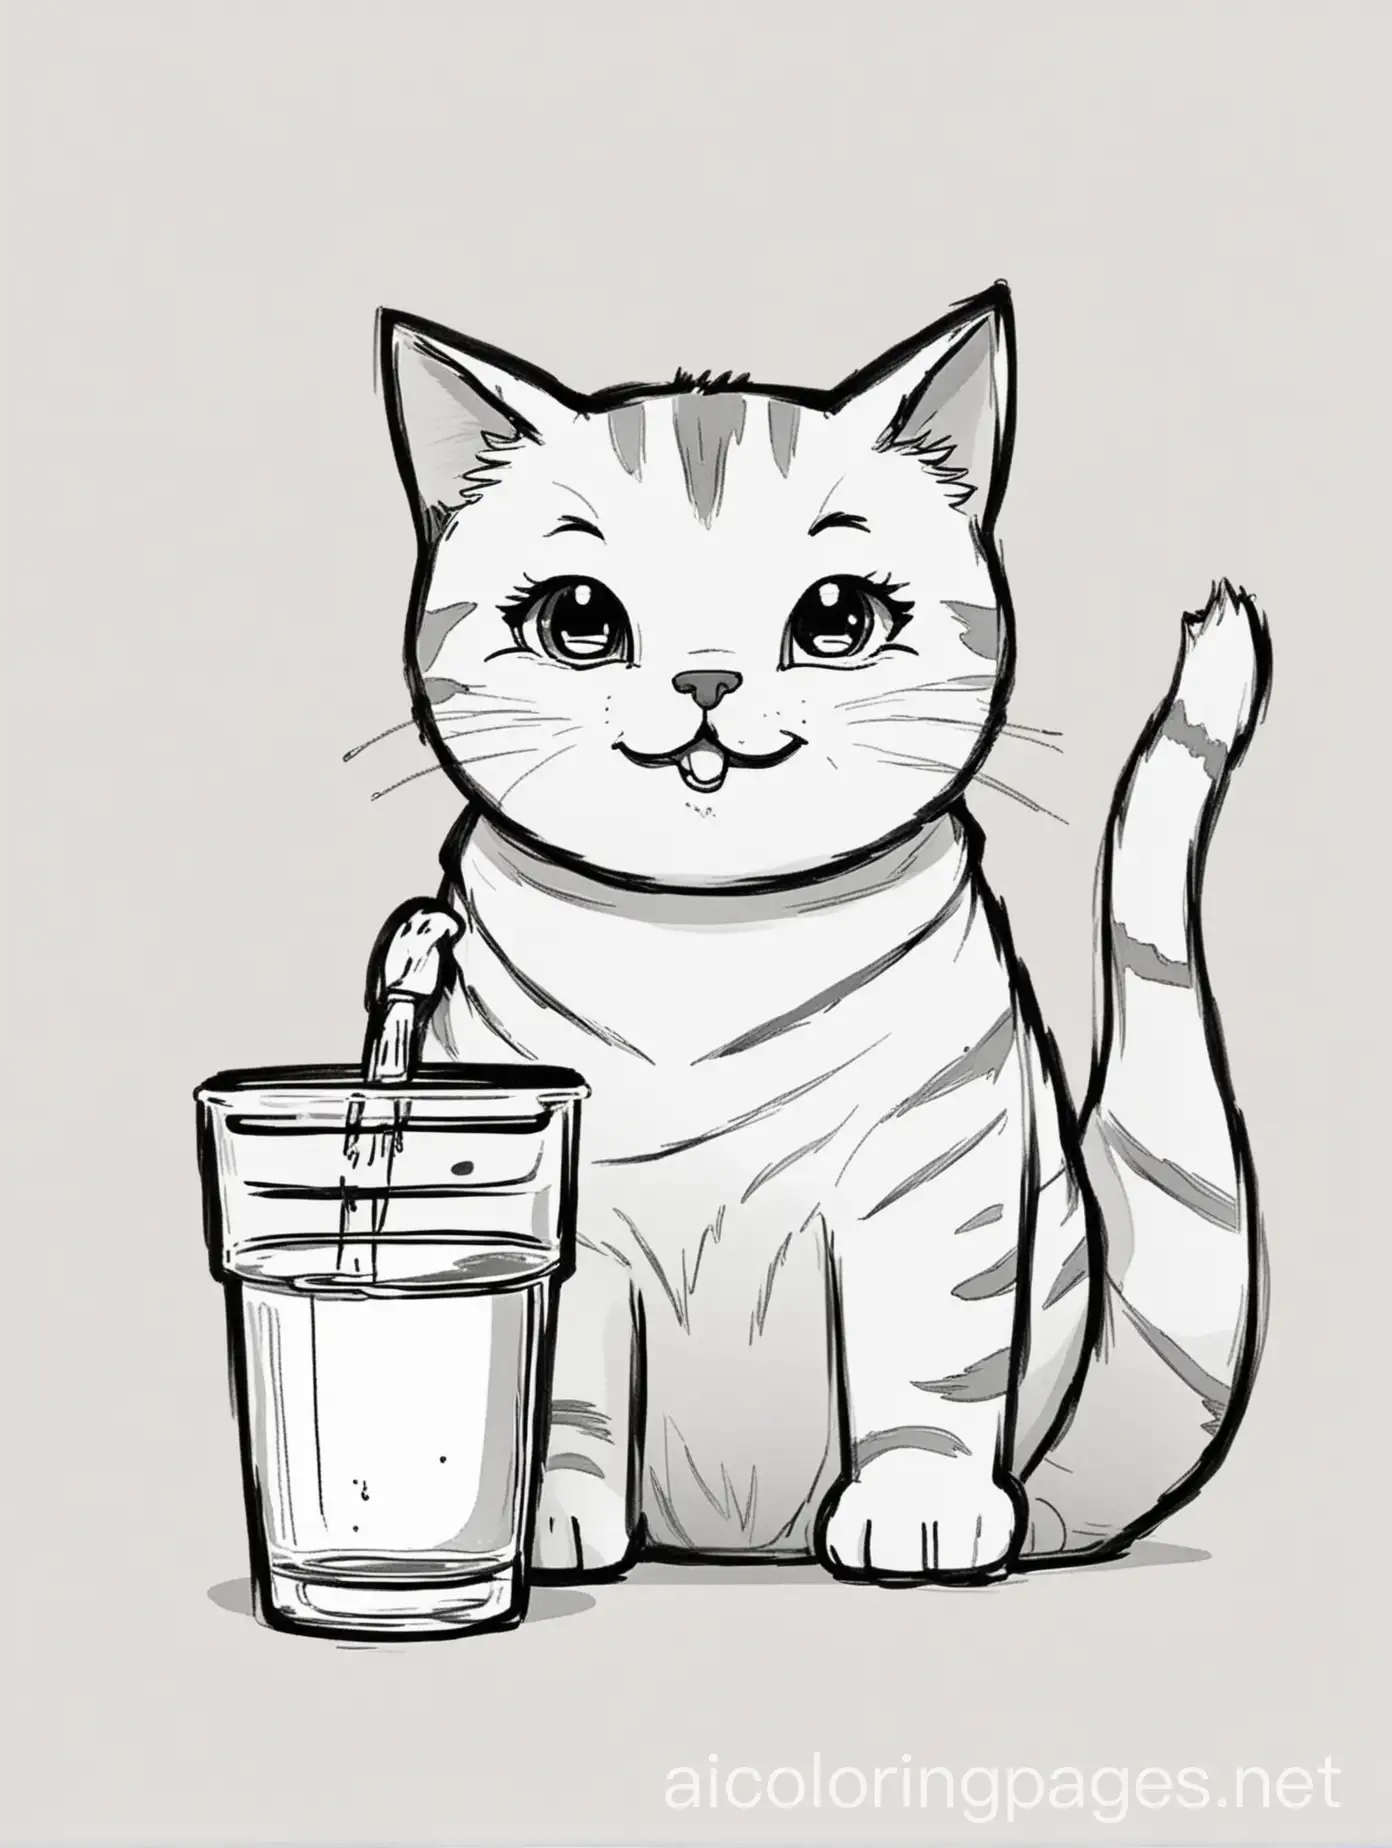 cute cat smiling and drinking water, 
Coloring Page, black and white, line art, white background, Simplicity, Ample White Space. , Coloring Page, black and white, line art, white background, Simplicity, Ample White Space. The background of the coloring page is plain white to make it easy for young children to color within the lines. The outlines of all the subjects are easy to distinguish, making it simple for kids to color without too much difficulty